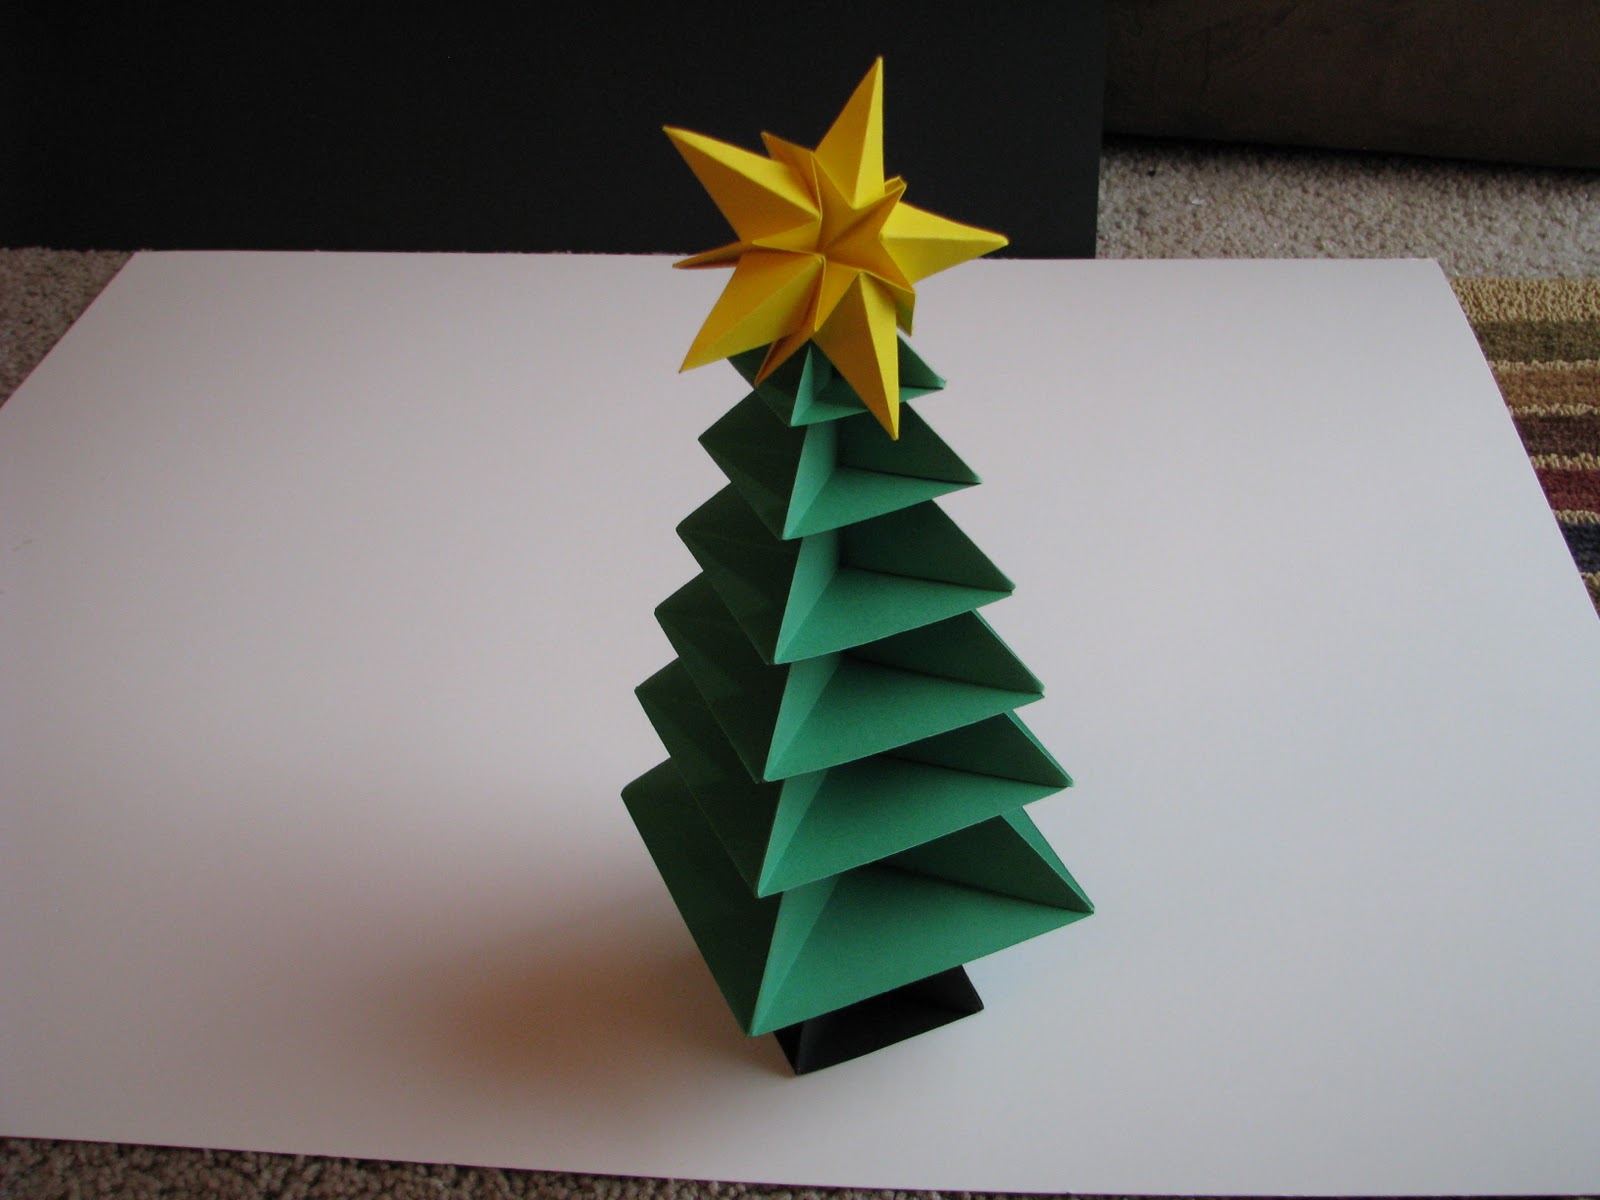 an example of creating an unusual Christmas tree from cardboard yourself